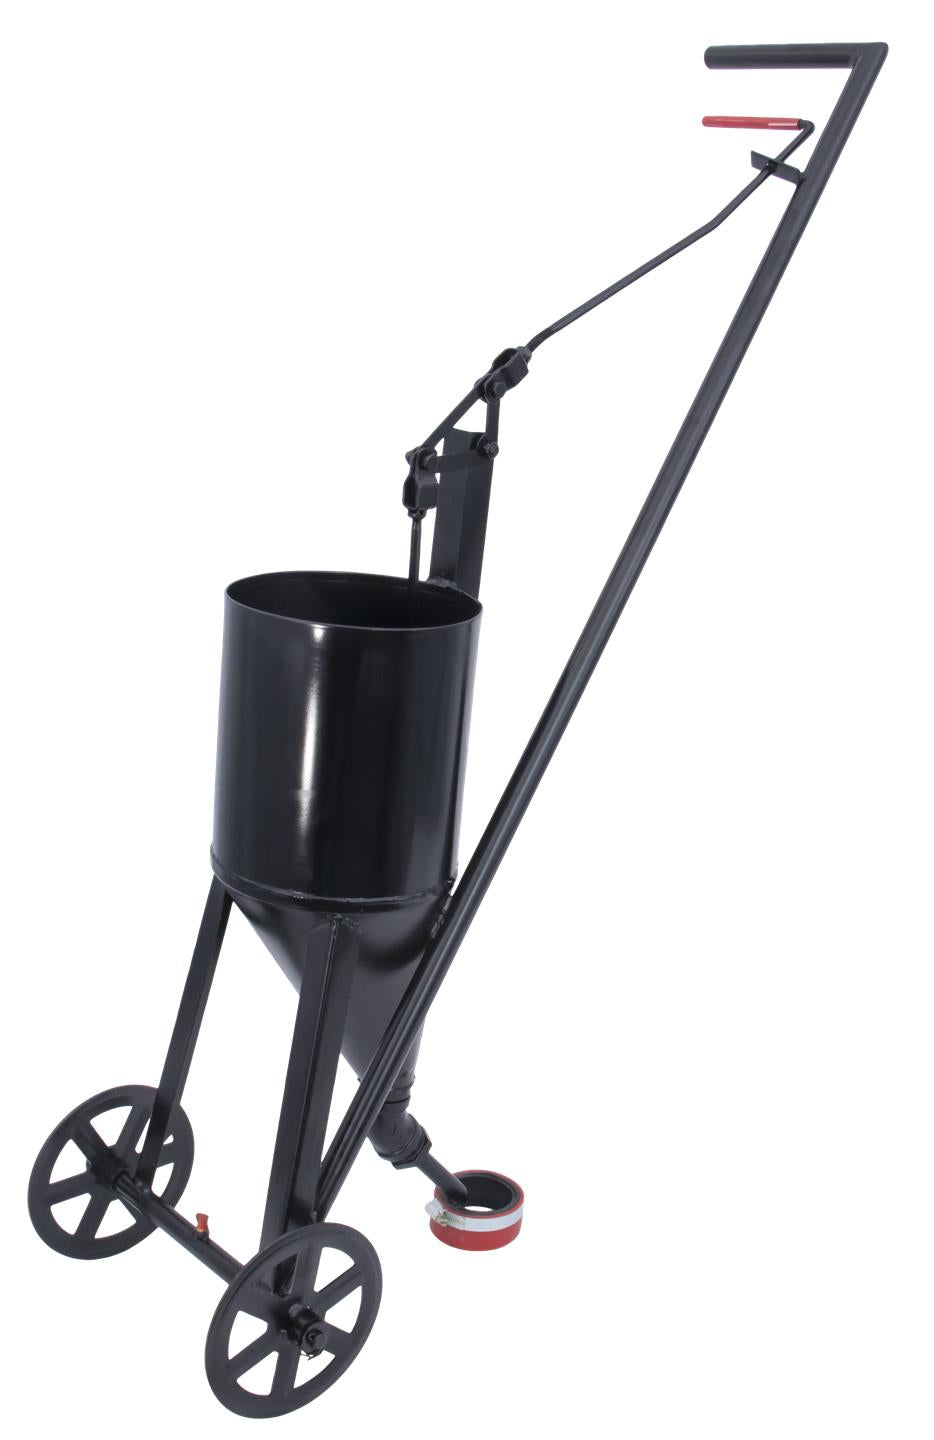 Marshalltown 20107 Asphalt Pour Pot with long handle wheels and round squeegee pour spout